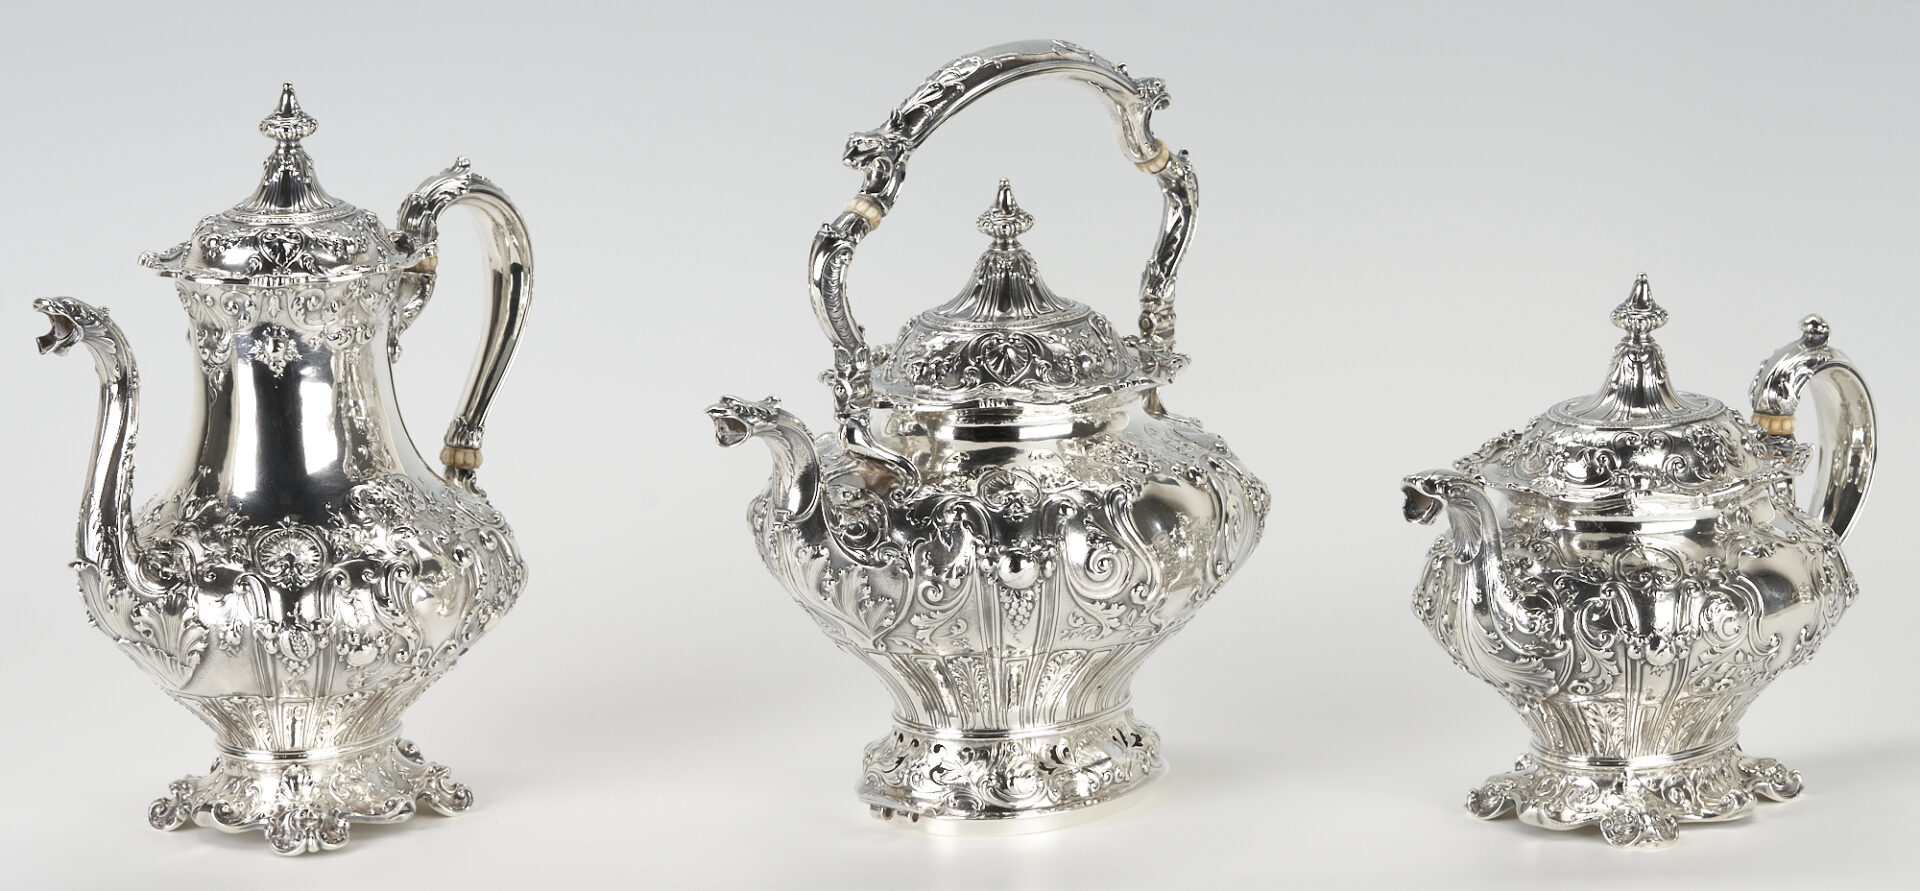 Lot 55: Gorham 7 pc  Silver Tea Set with Sterling Tray, 393 oz.